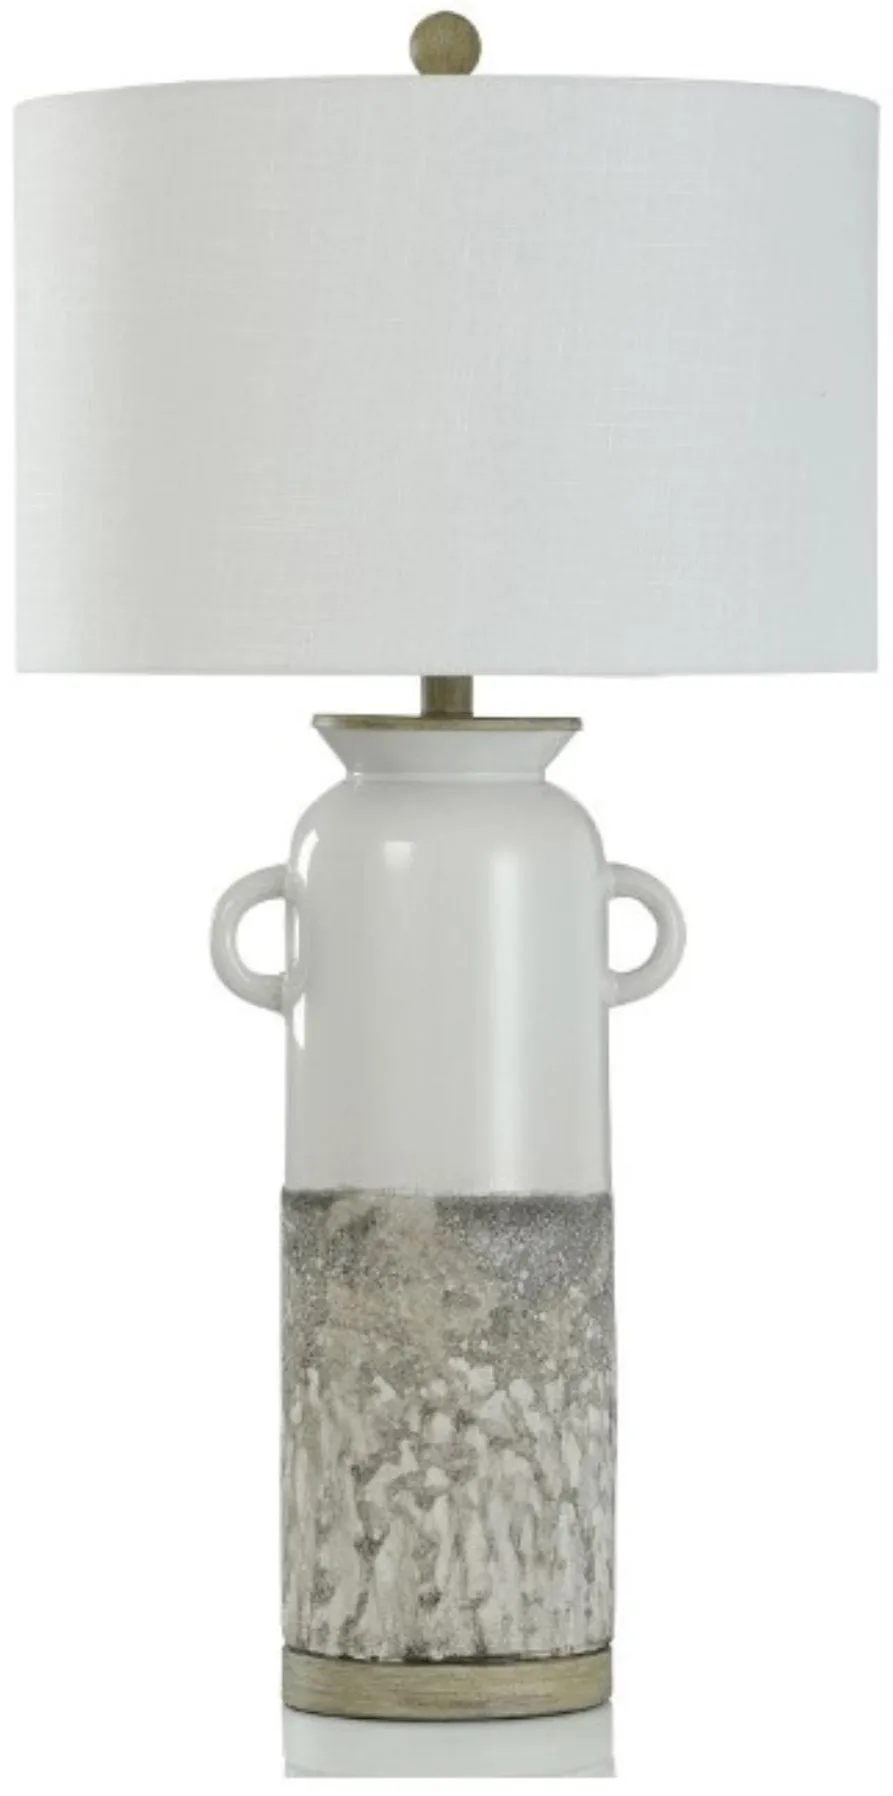 White and Grey Textured Ceramic Table Lamp 33.5"H